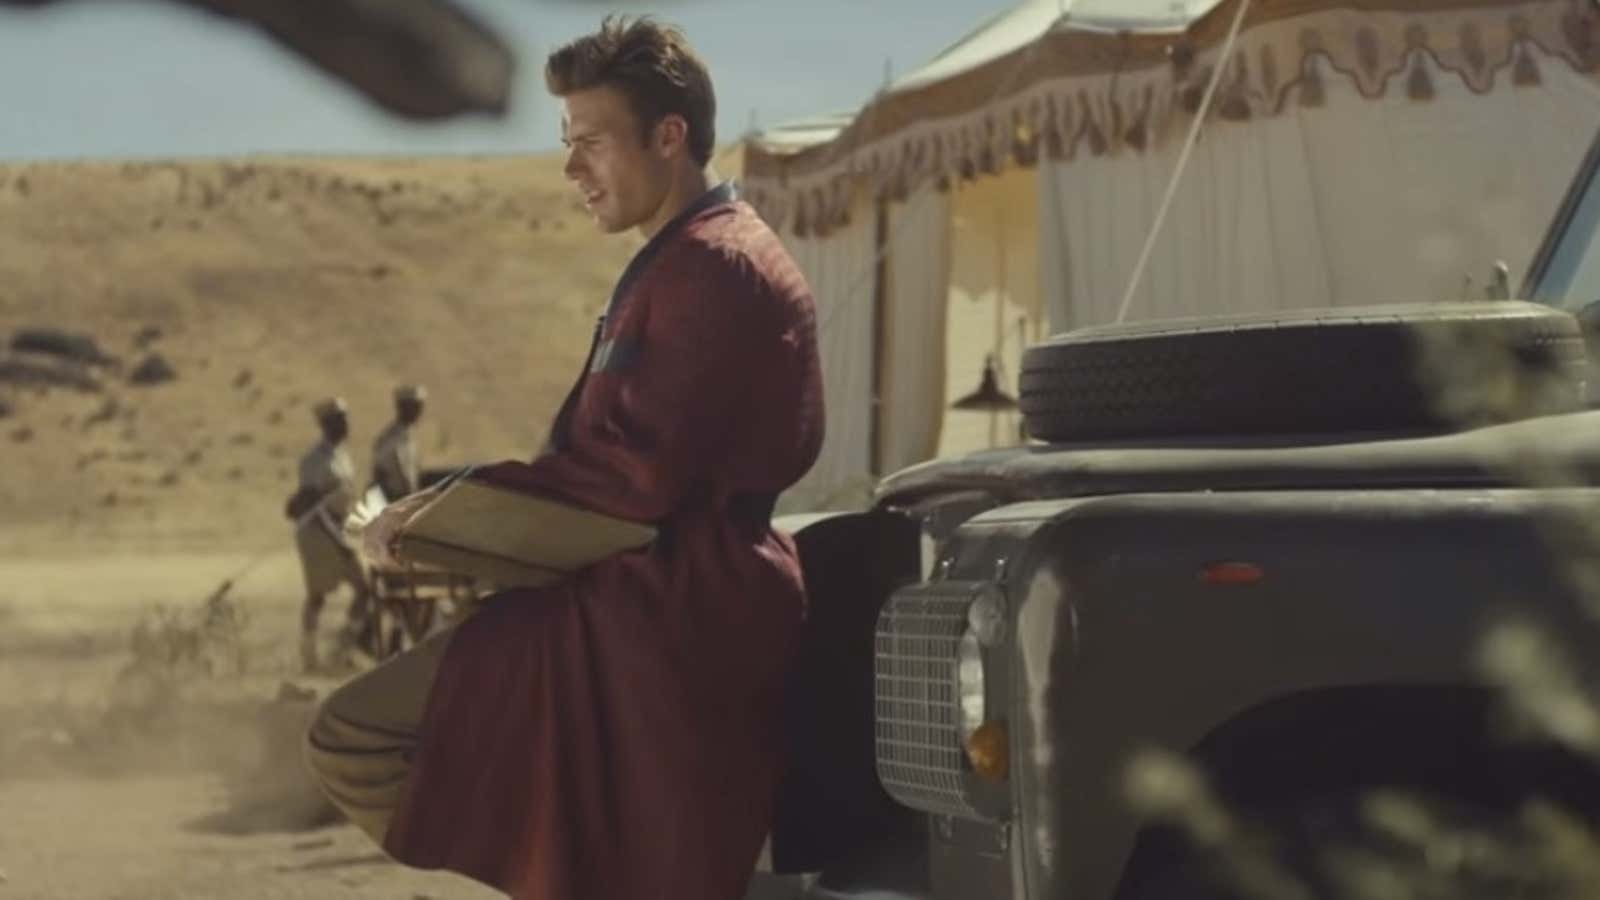 Black actors in the music video for Taylor Swift’s song “Wildest Dreams.”